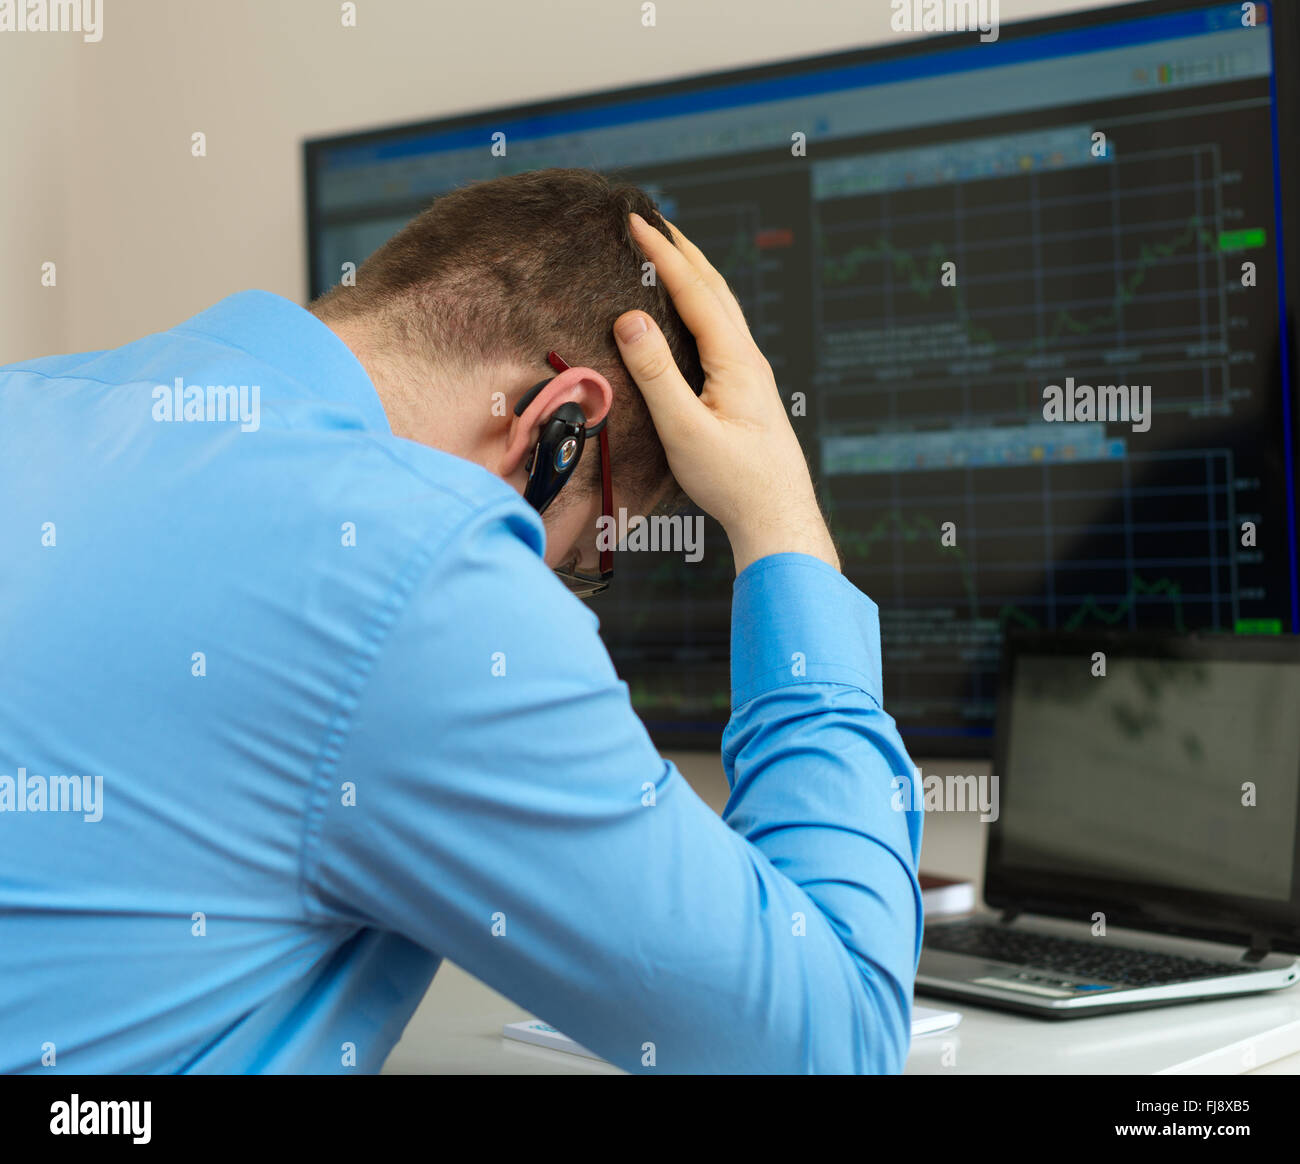 Upset stock trader in front of computer. Stock Photo